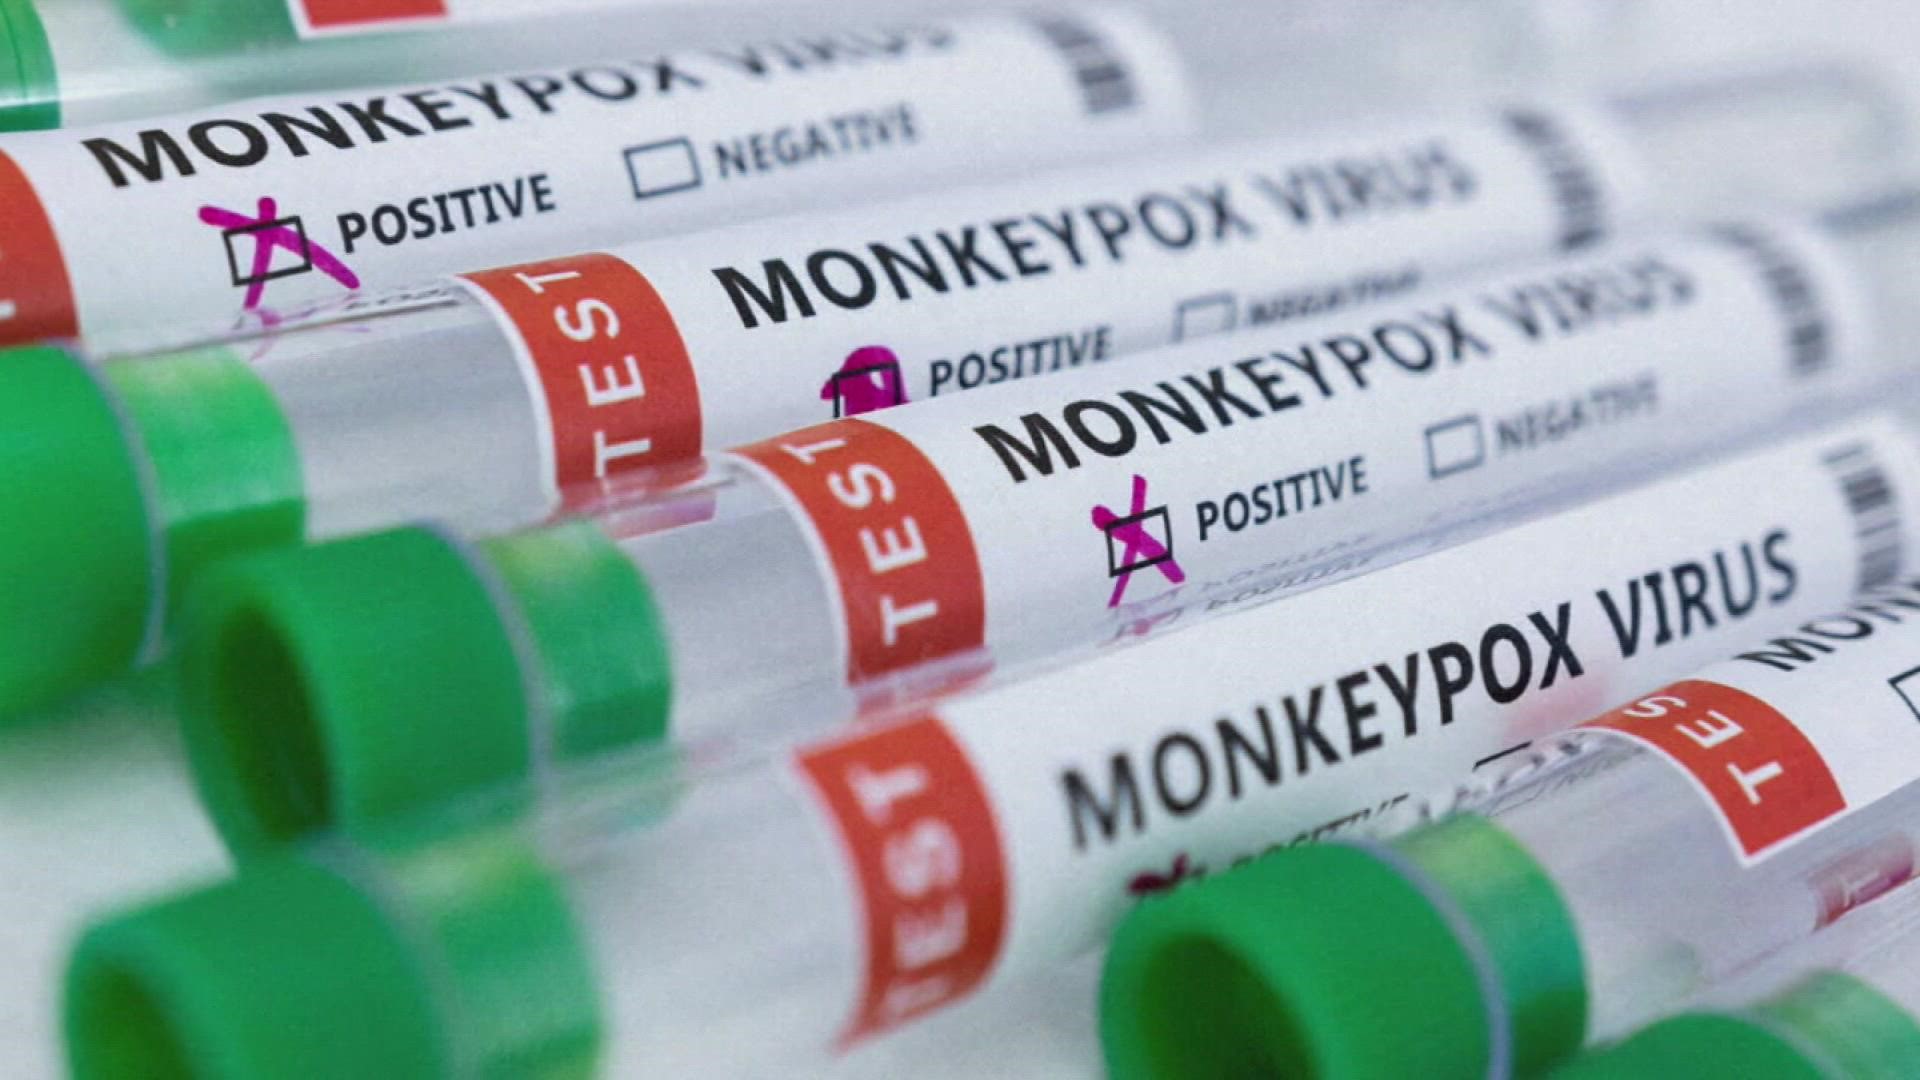 More than 6,000 cases of monkeypox have been reported in the U.S.